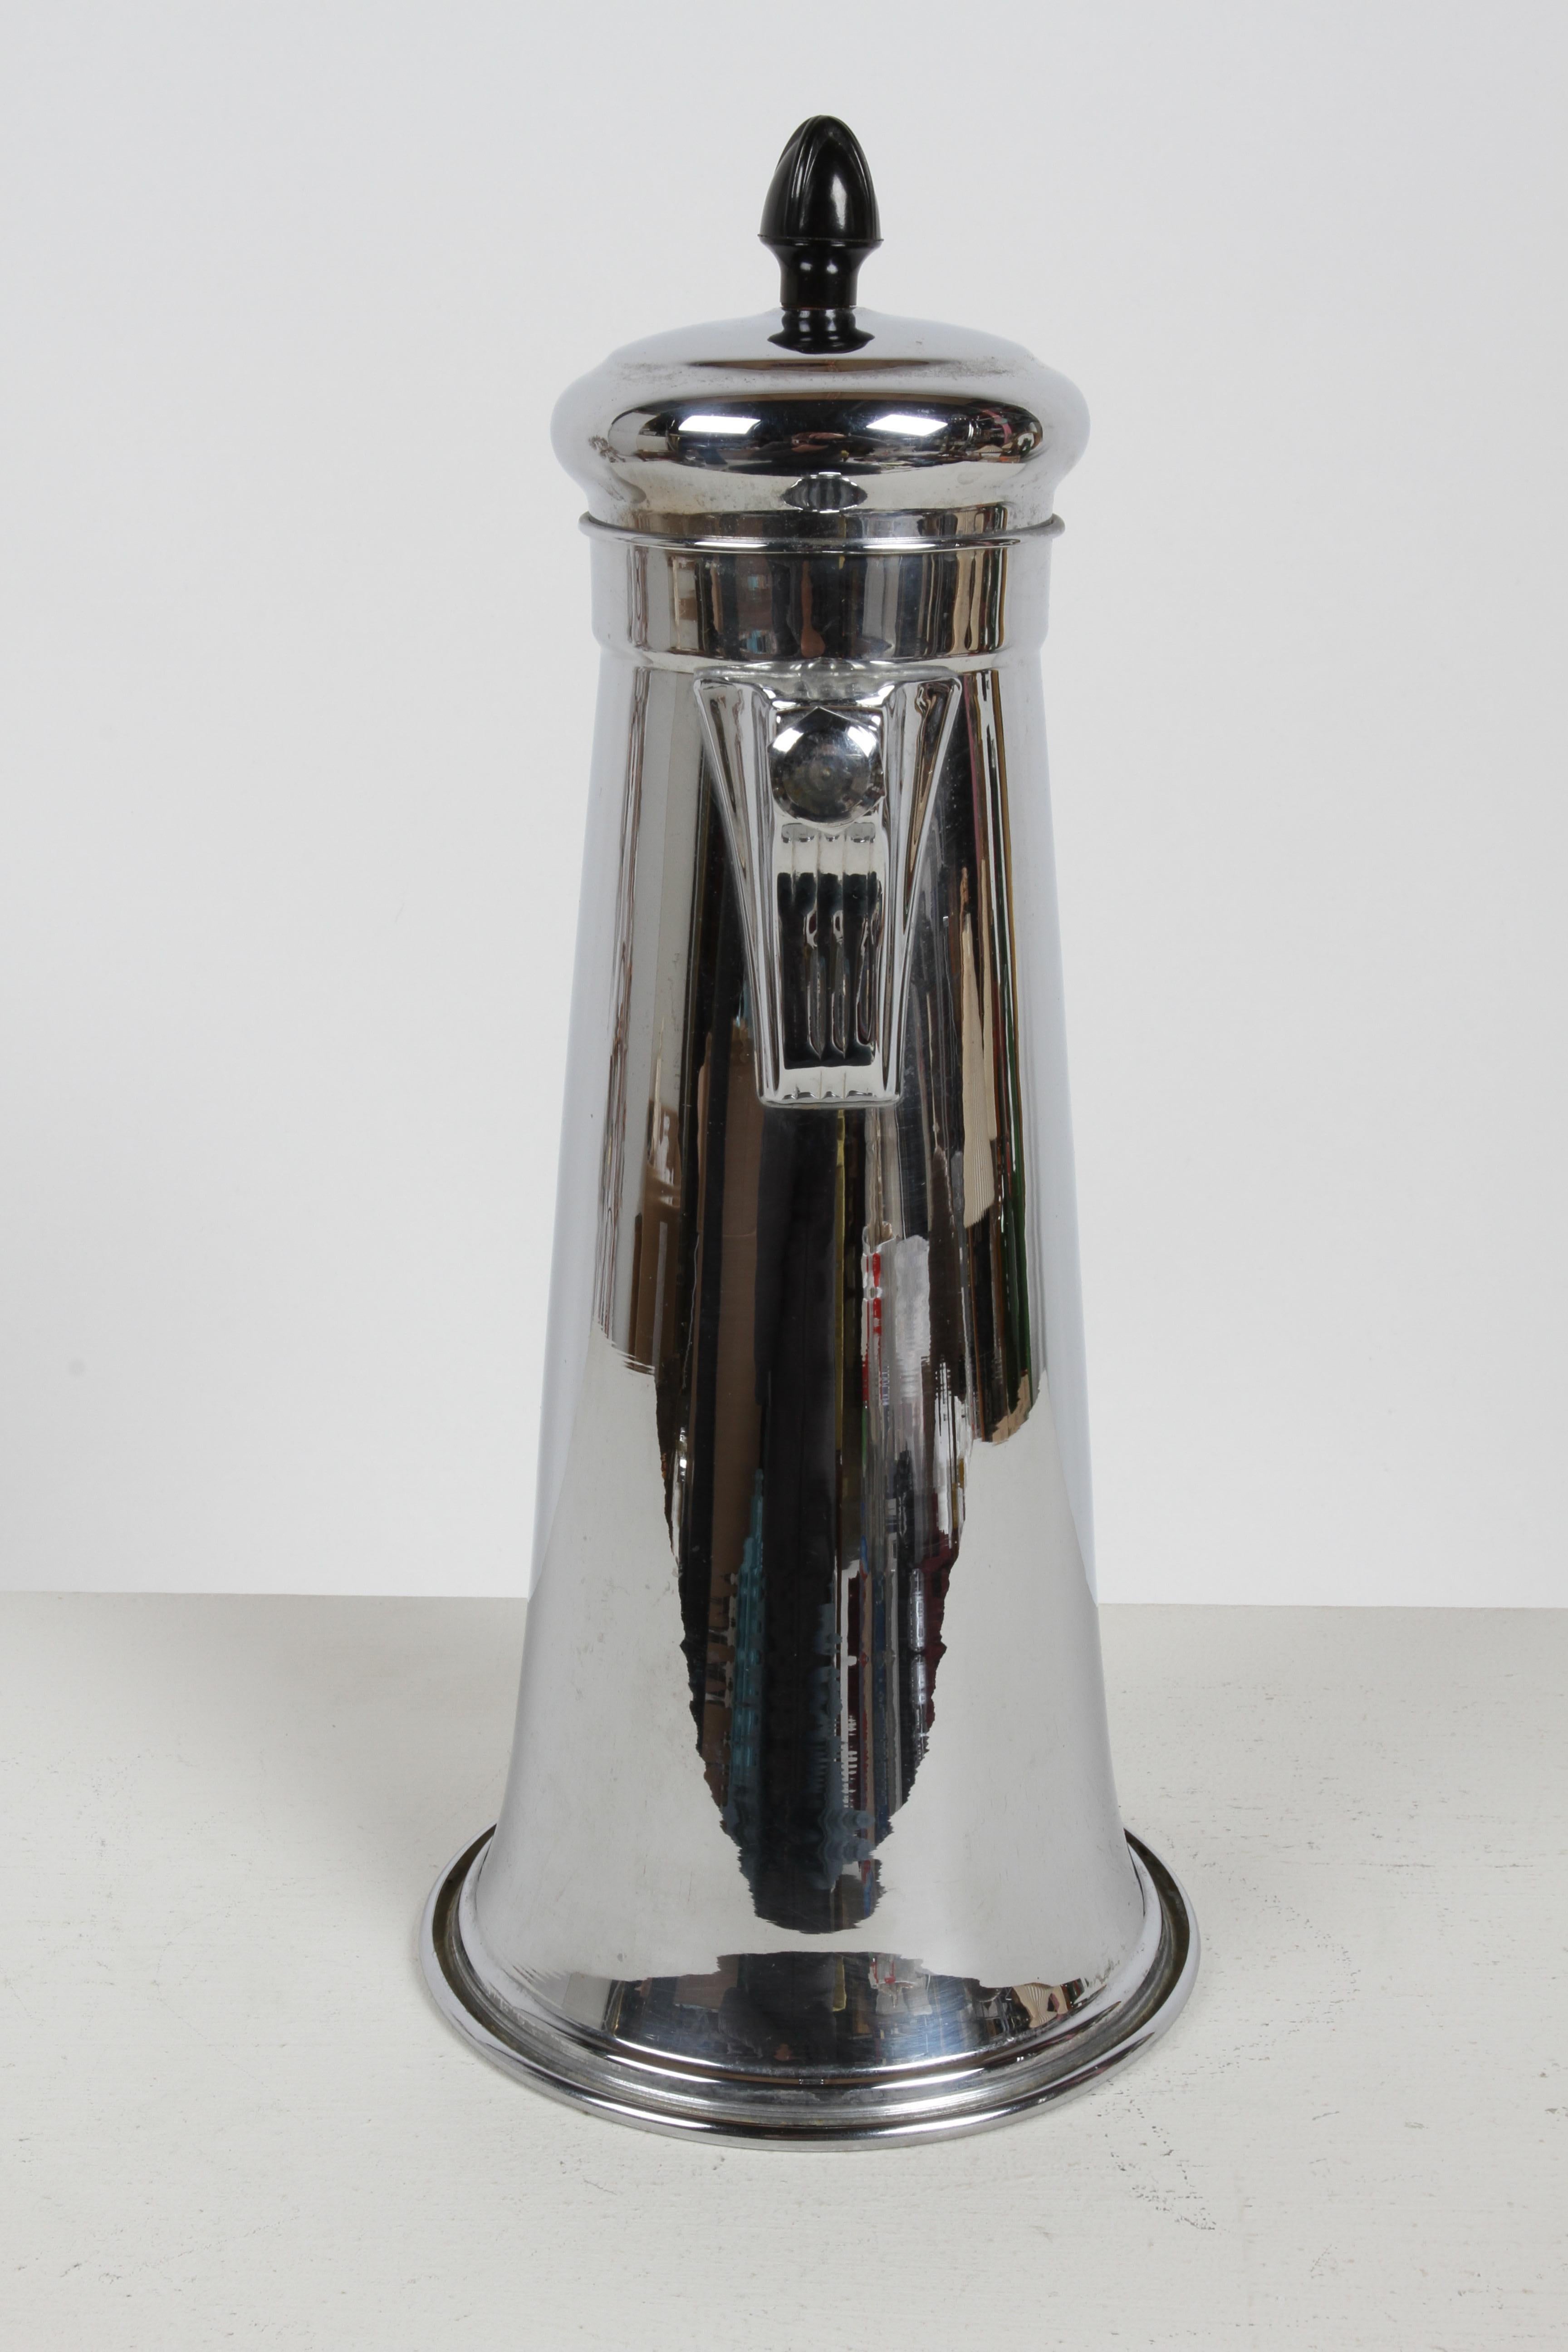 1930s Forman Brothers Art Deco Black Handle Chrome Cocktail Shaker with Recipes  In Good Condition For Sale In St. Louis, MO